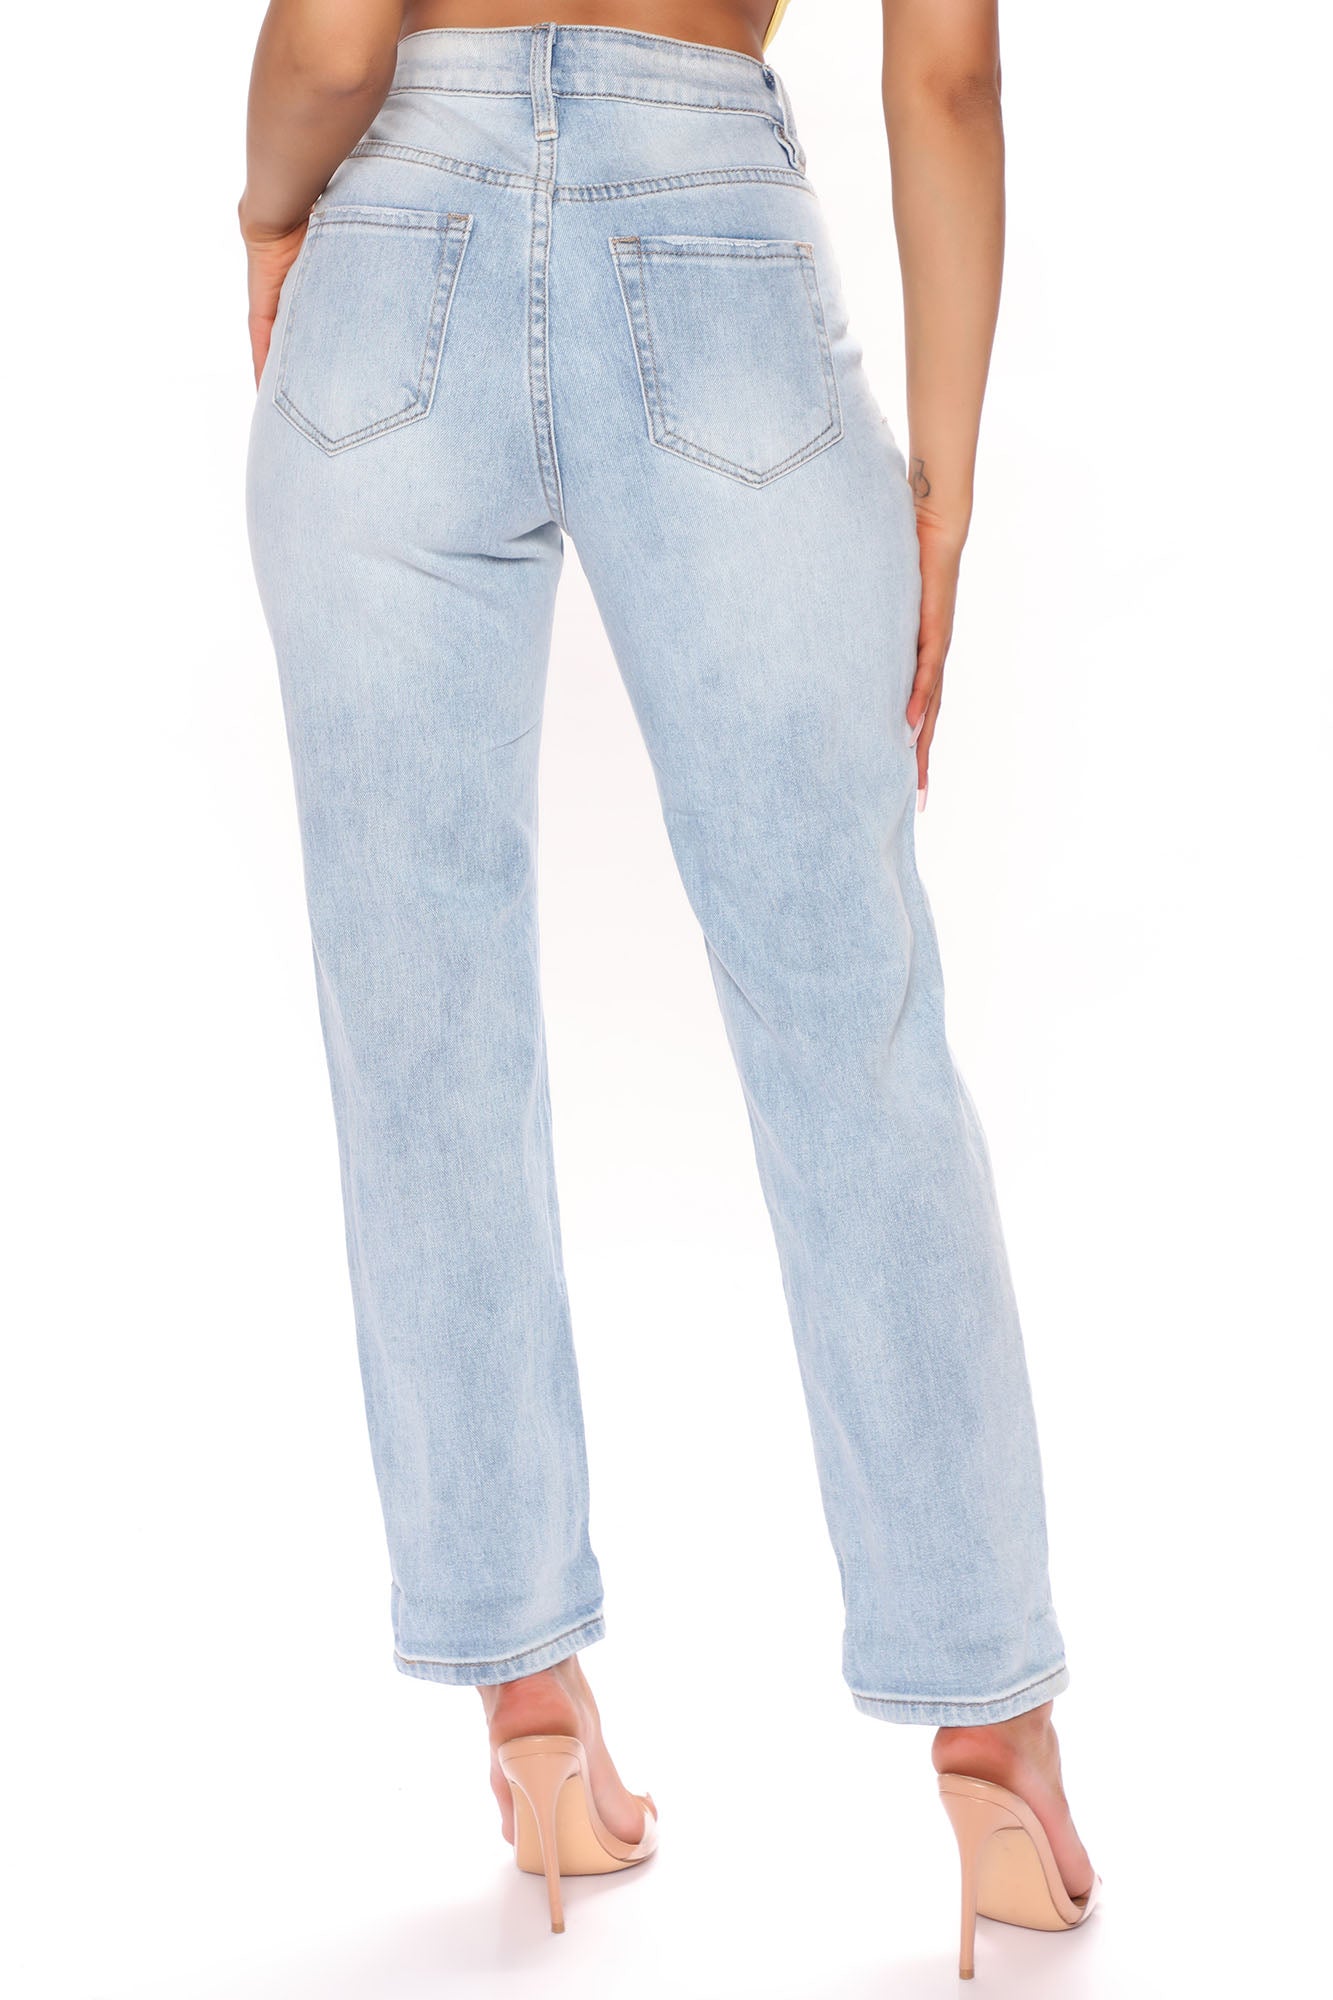 Choose Wisely Distressed Mom Jean - Light Blue Wash